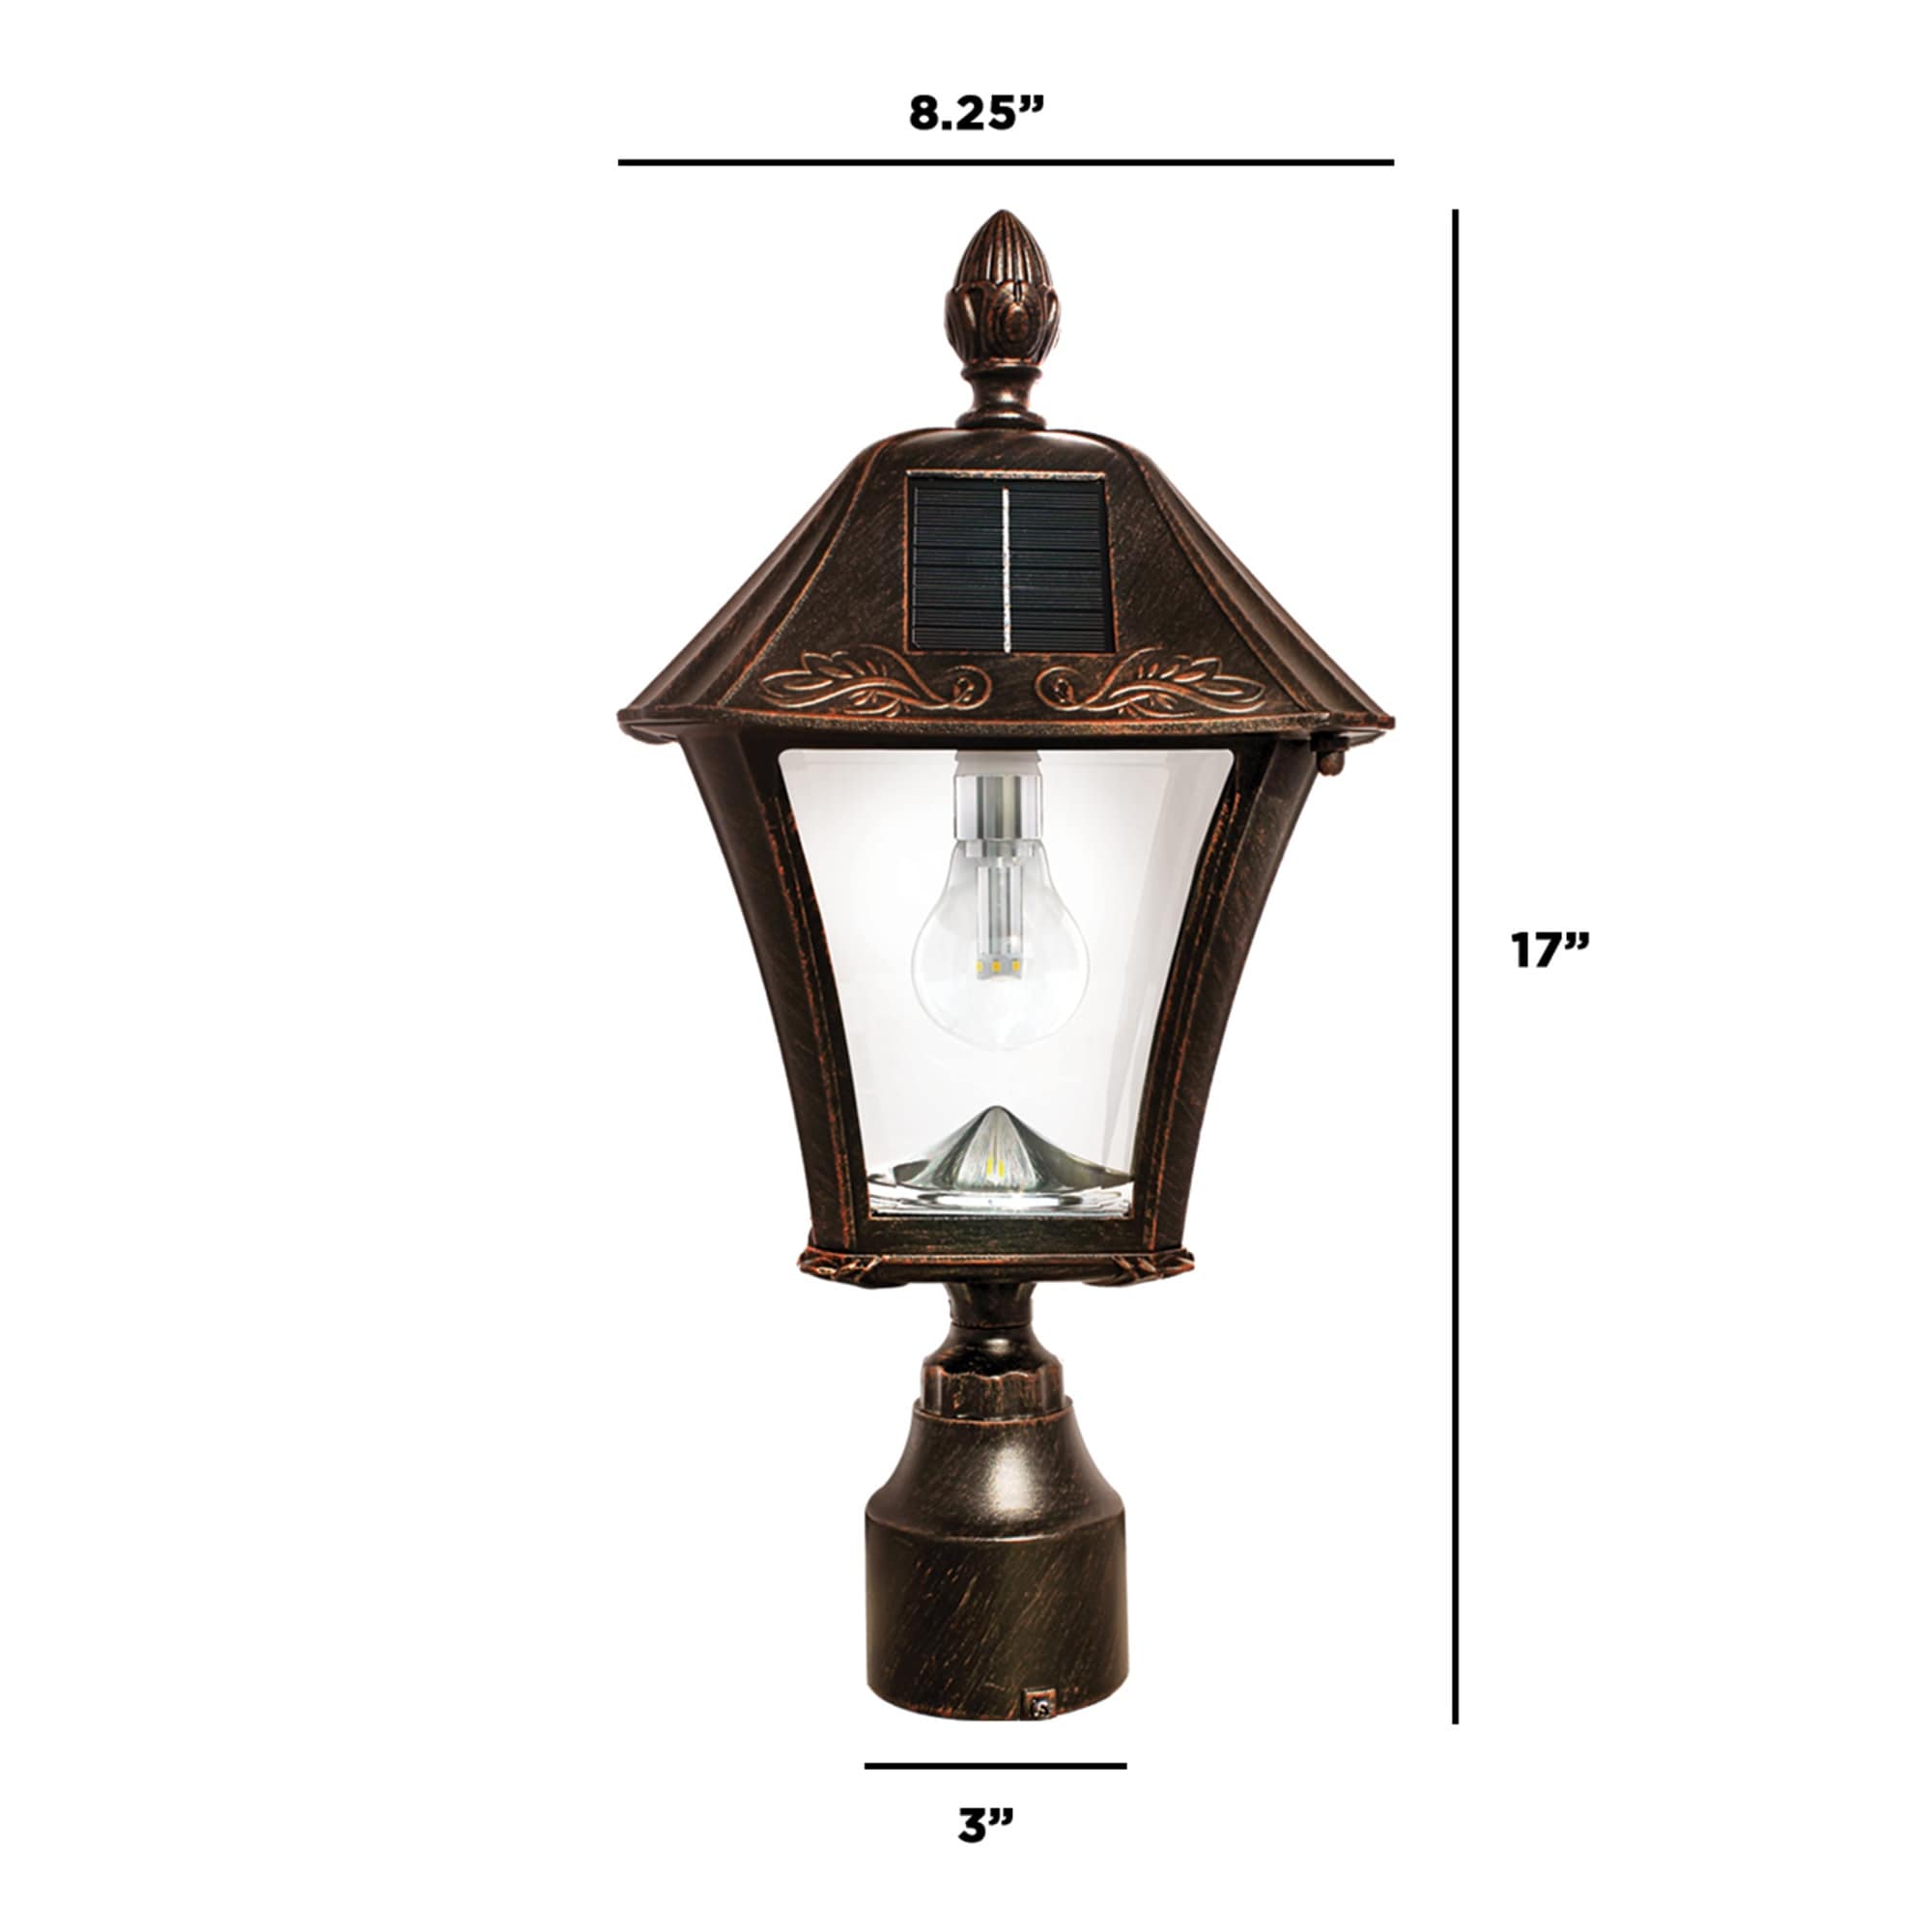 Gama Sonic Baytown Bulb 18" Tall LED Outdoor Pier Mount Post Light Bed  Bath  Beyond 38067599